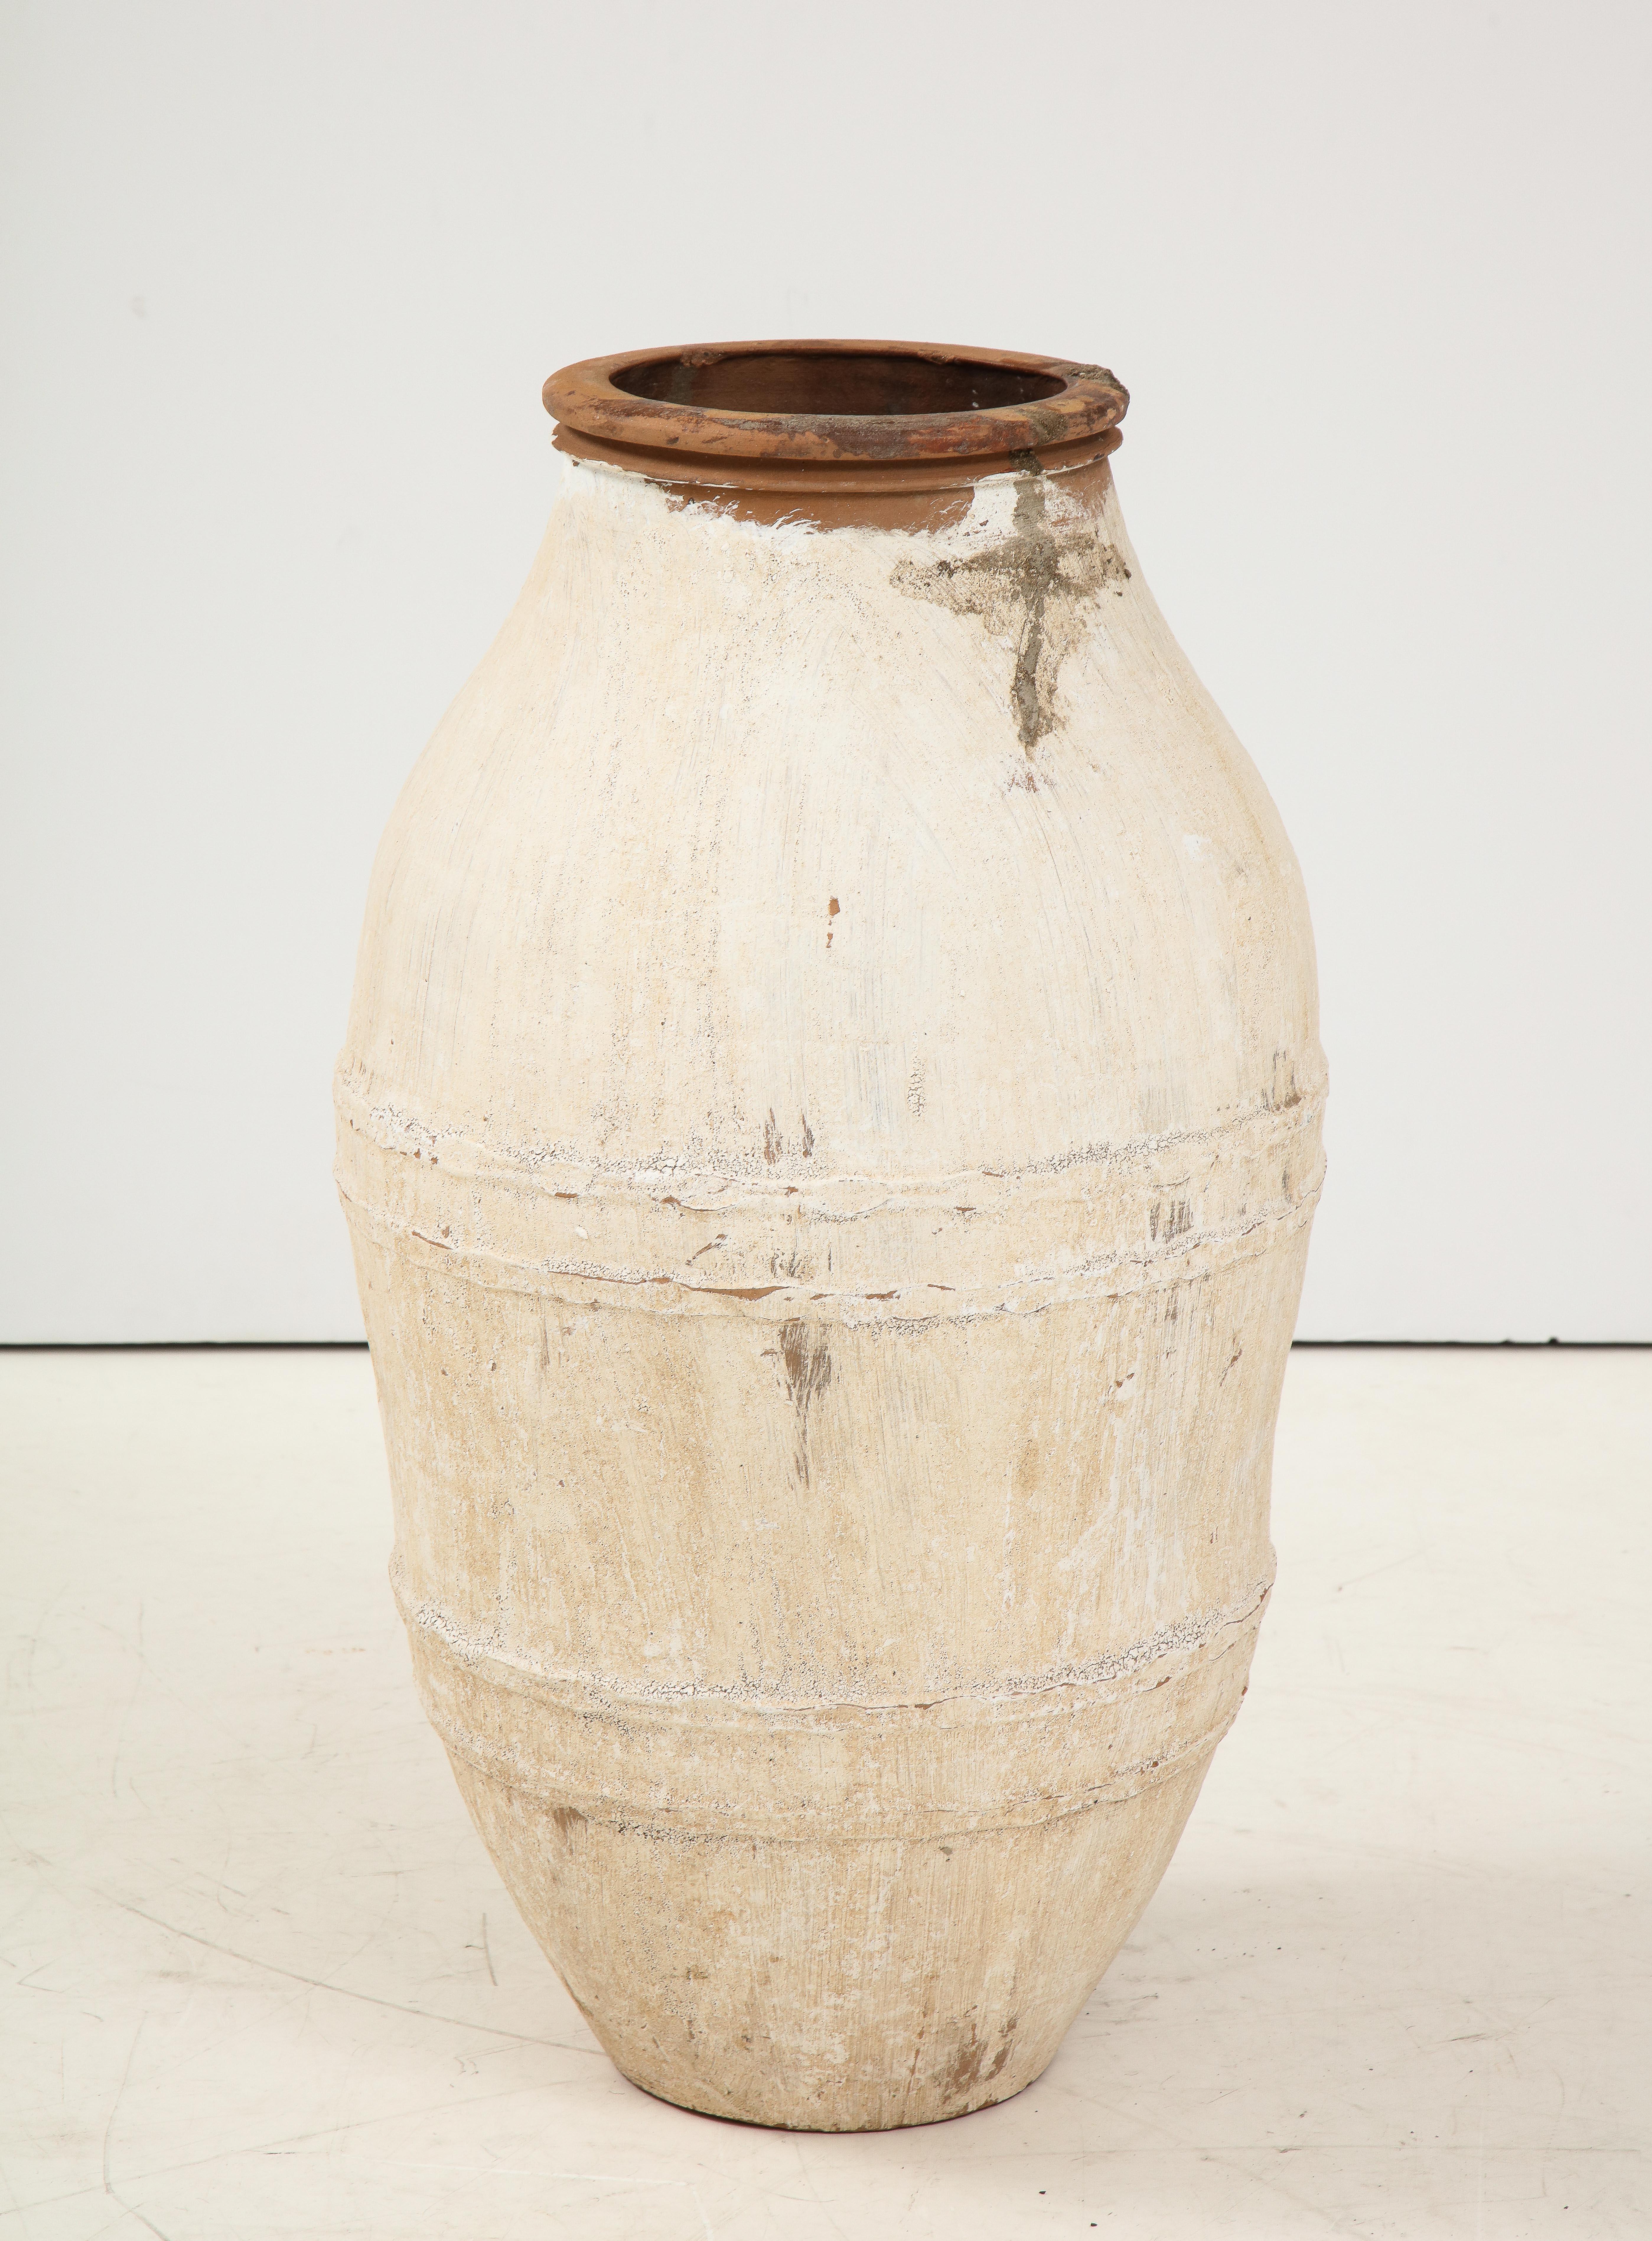 An Italian antique terracotta olive oil jar in white painted finish; with a beautifully aged patina and the natural terracotta showing through. These jars were historically used to transport olive oil in the Mediterranean region during the 18th thru